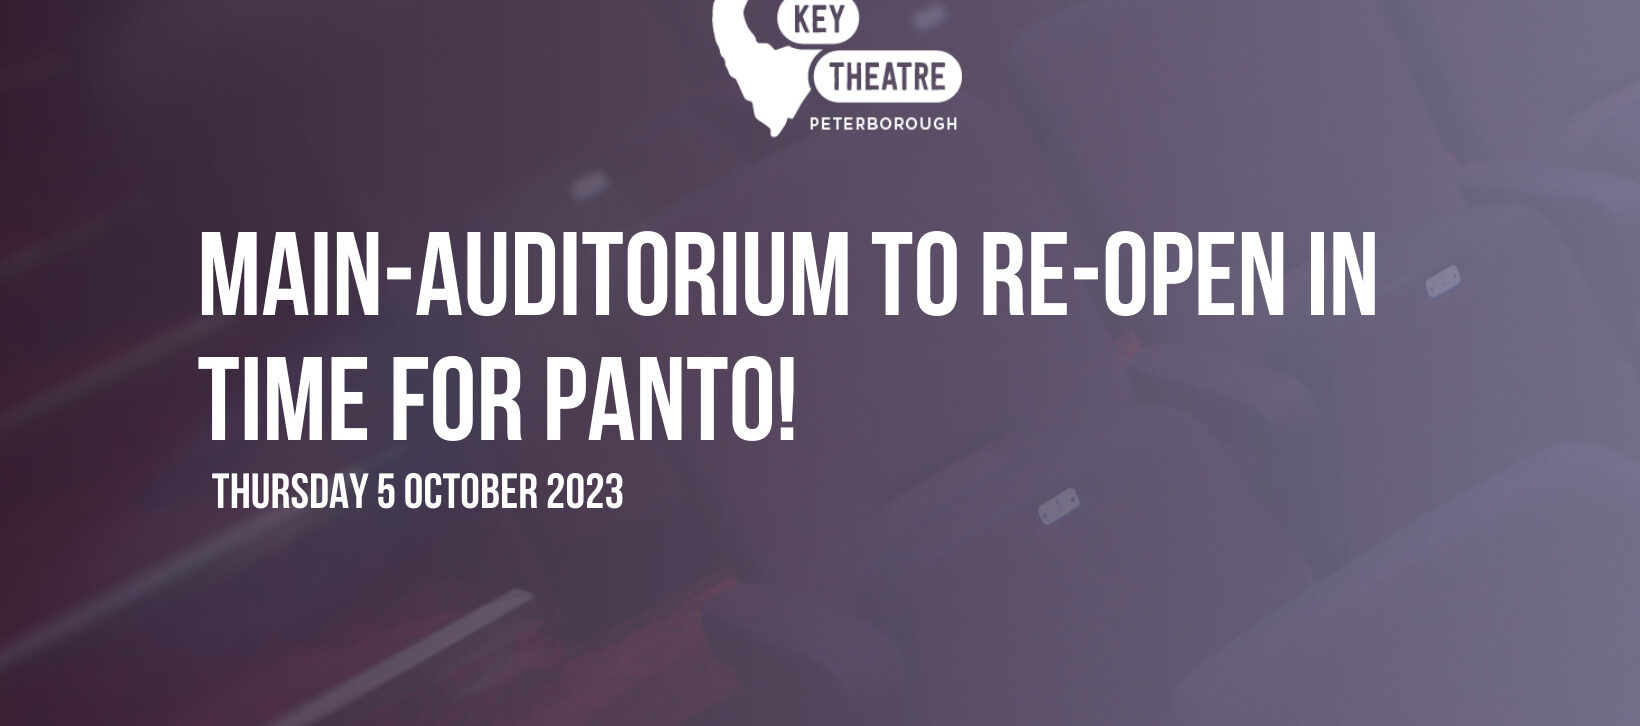 Key Theatre Main-Auditorium to Re-Open in time for Panto!